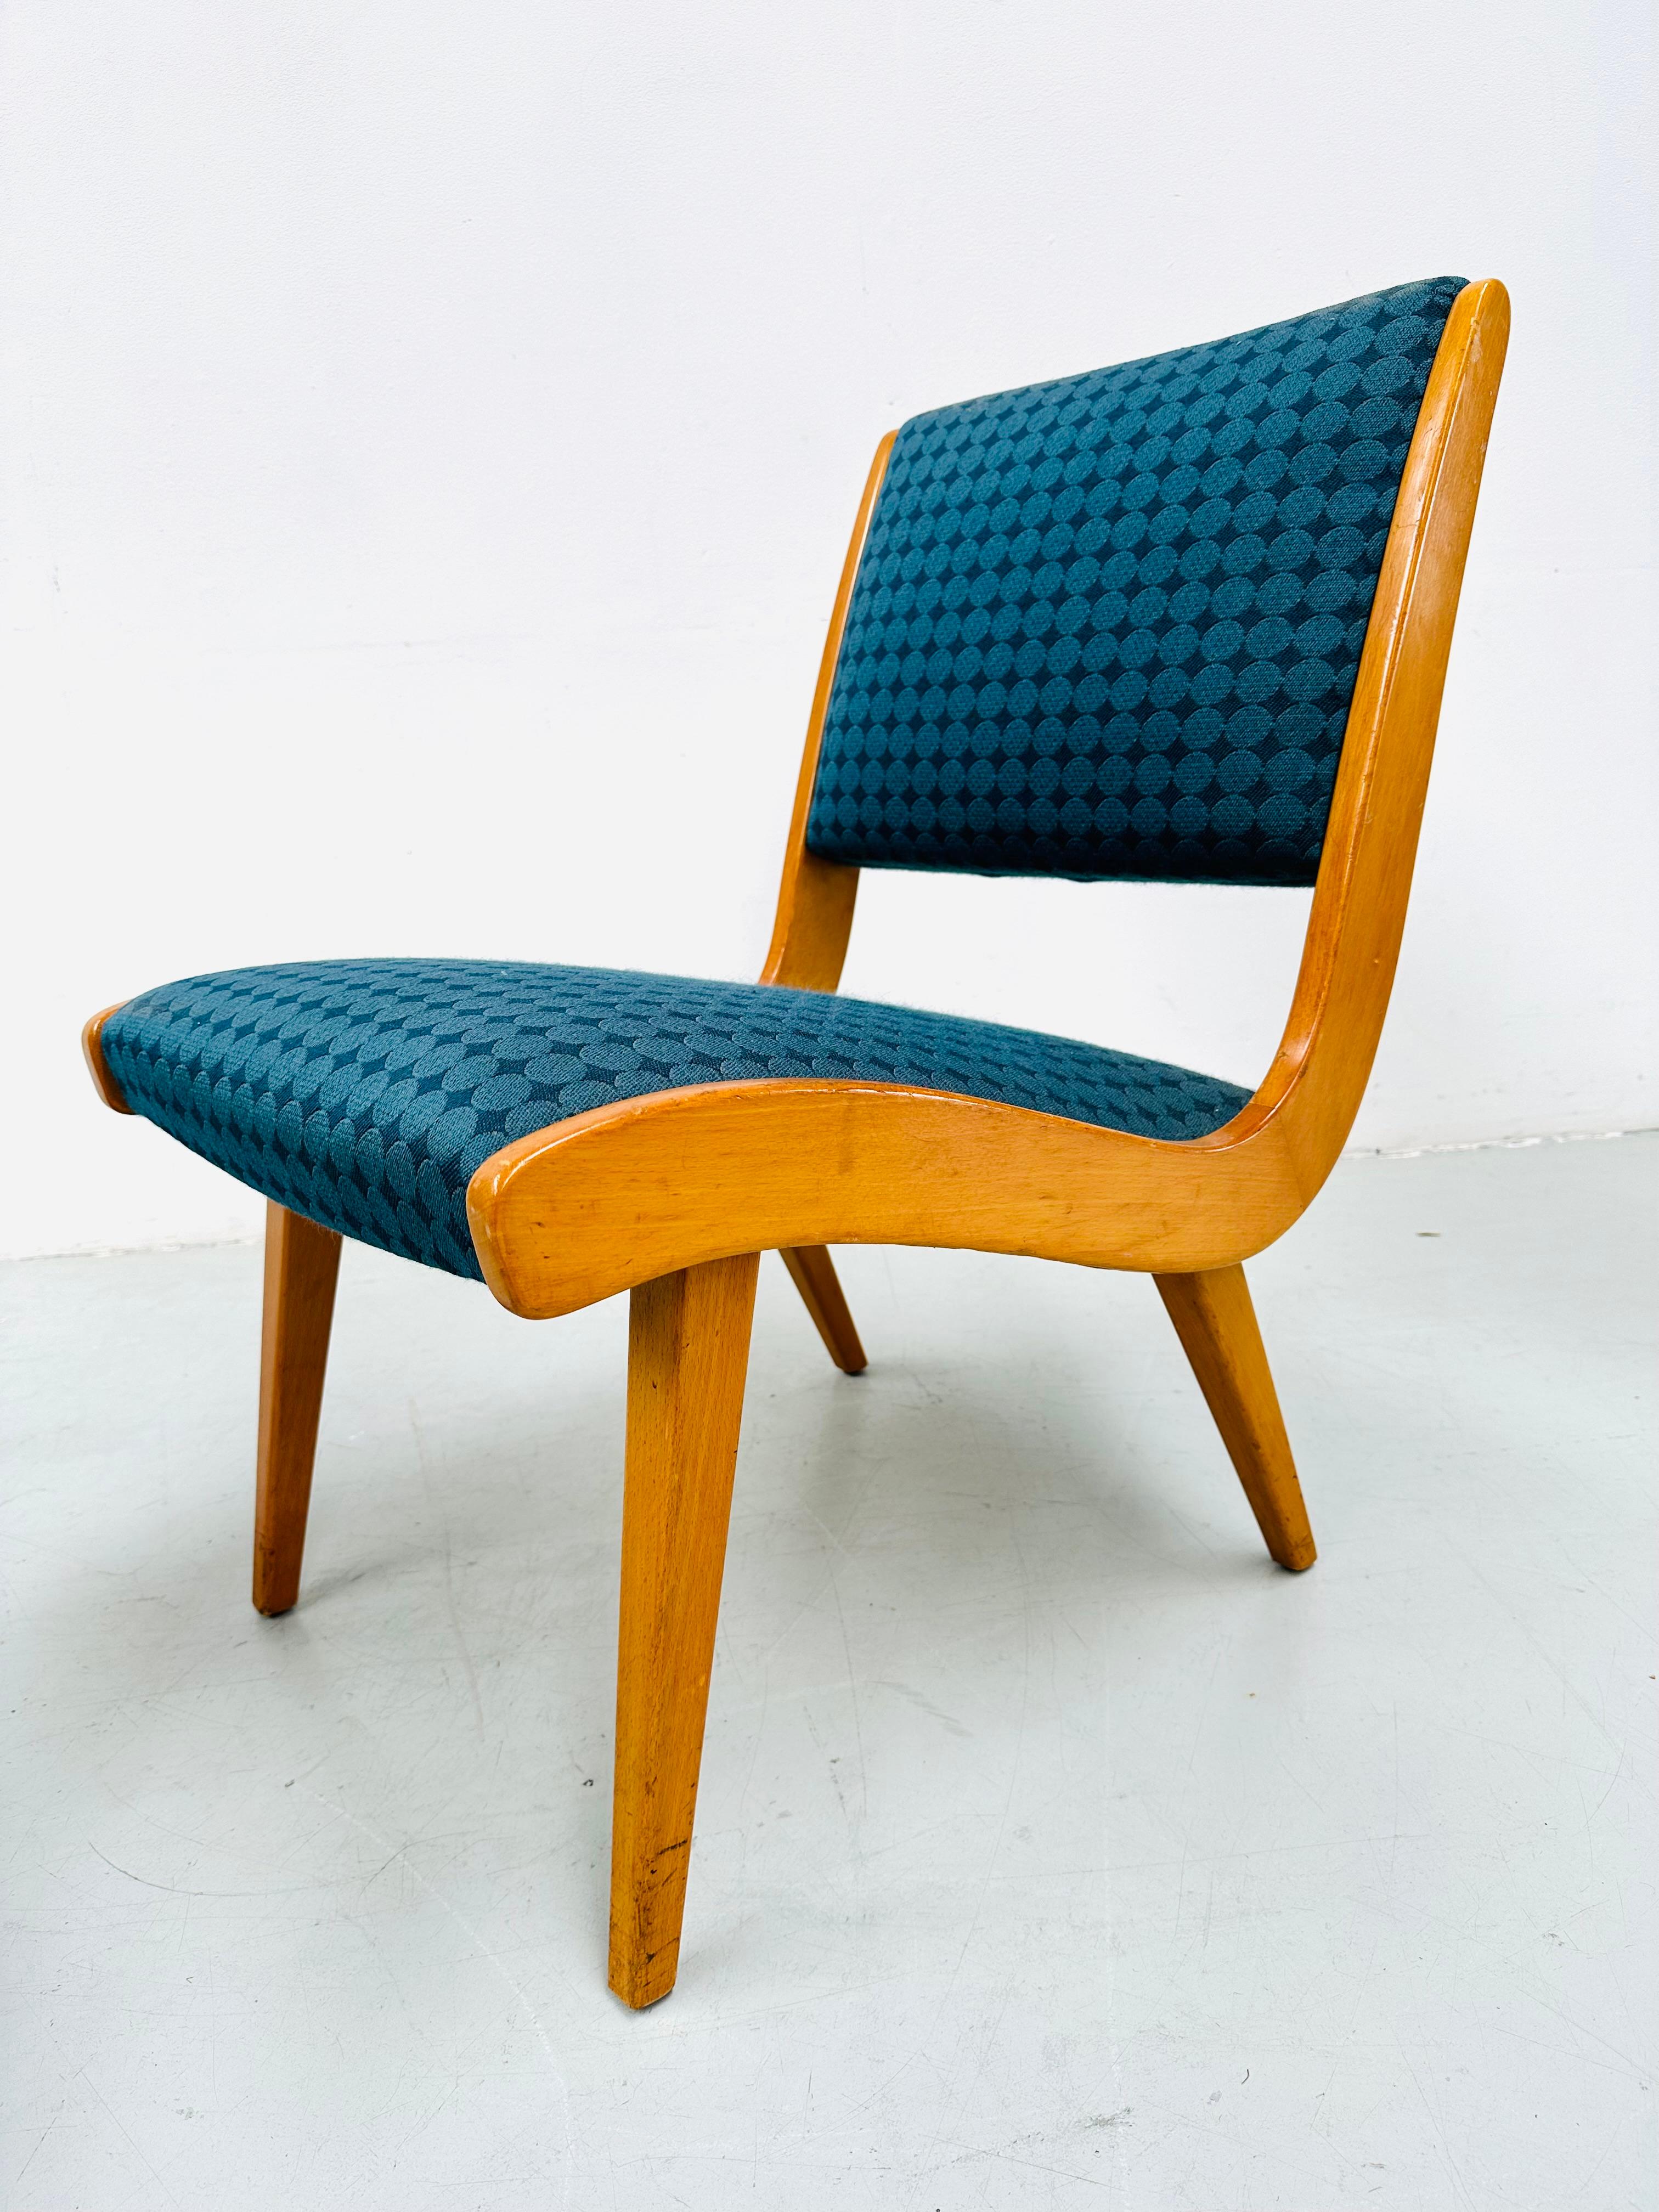 1950s Rare Set Vostra Chairs Numbered & Original Fabric by Jens Risom for Knoll. en vente 12